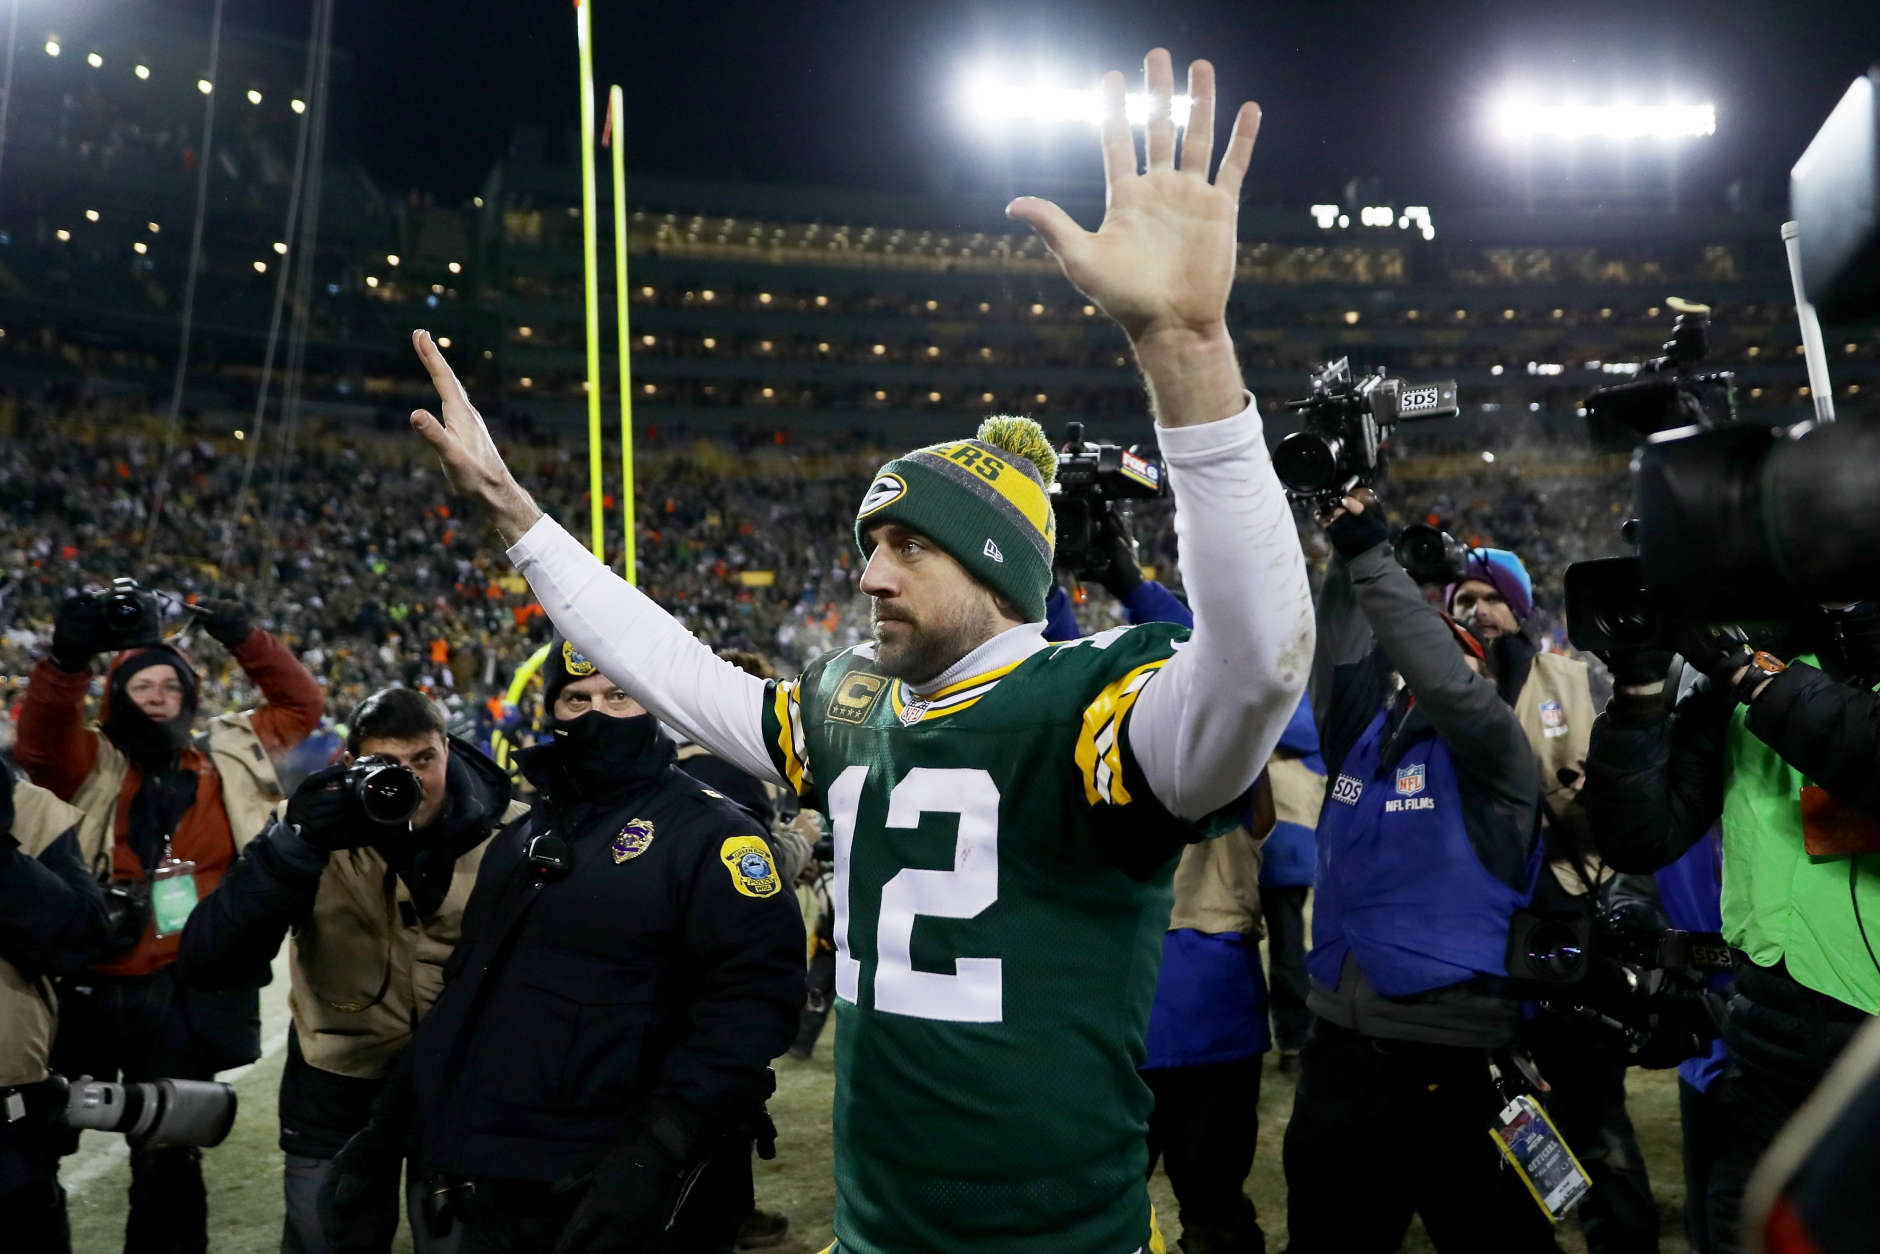 GREEN BAY, WI - JANUARY 8:  Aaron Rodgers #12 of the Green Bay Packers walks off the field after beating the New York Giants 38-13 in the NFC Wild Card game at Lambeau Field on January 8, 2017 in Green Bay, Wisconsin. (Photo by Jonathan Daniel/Getty Images)